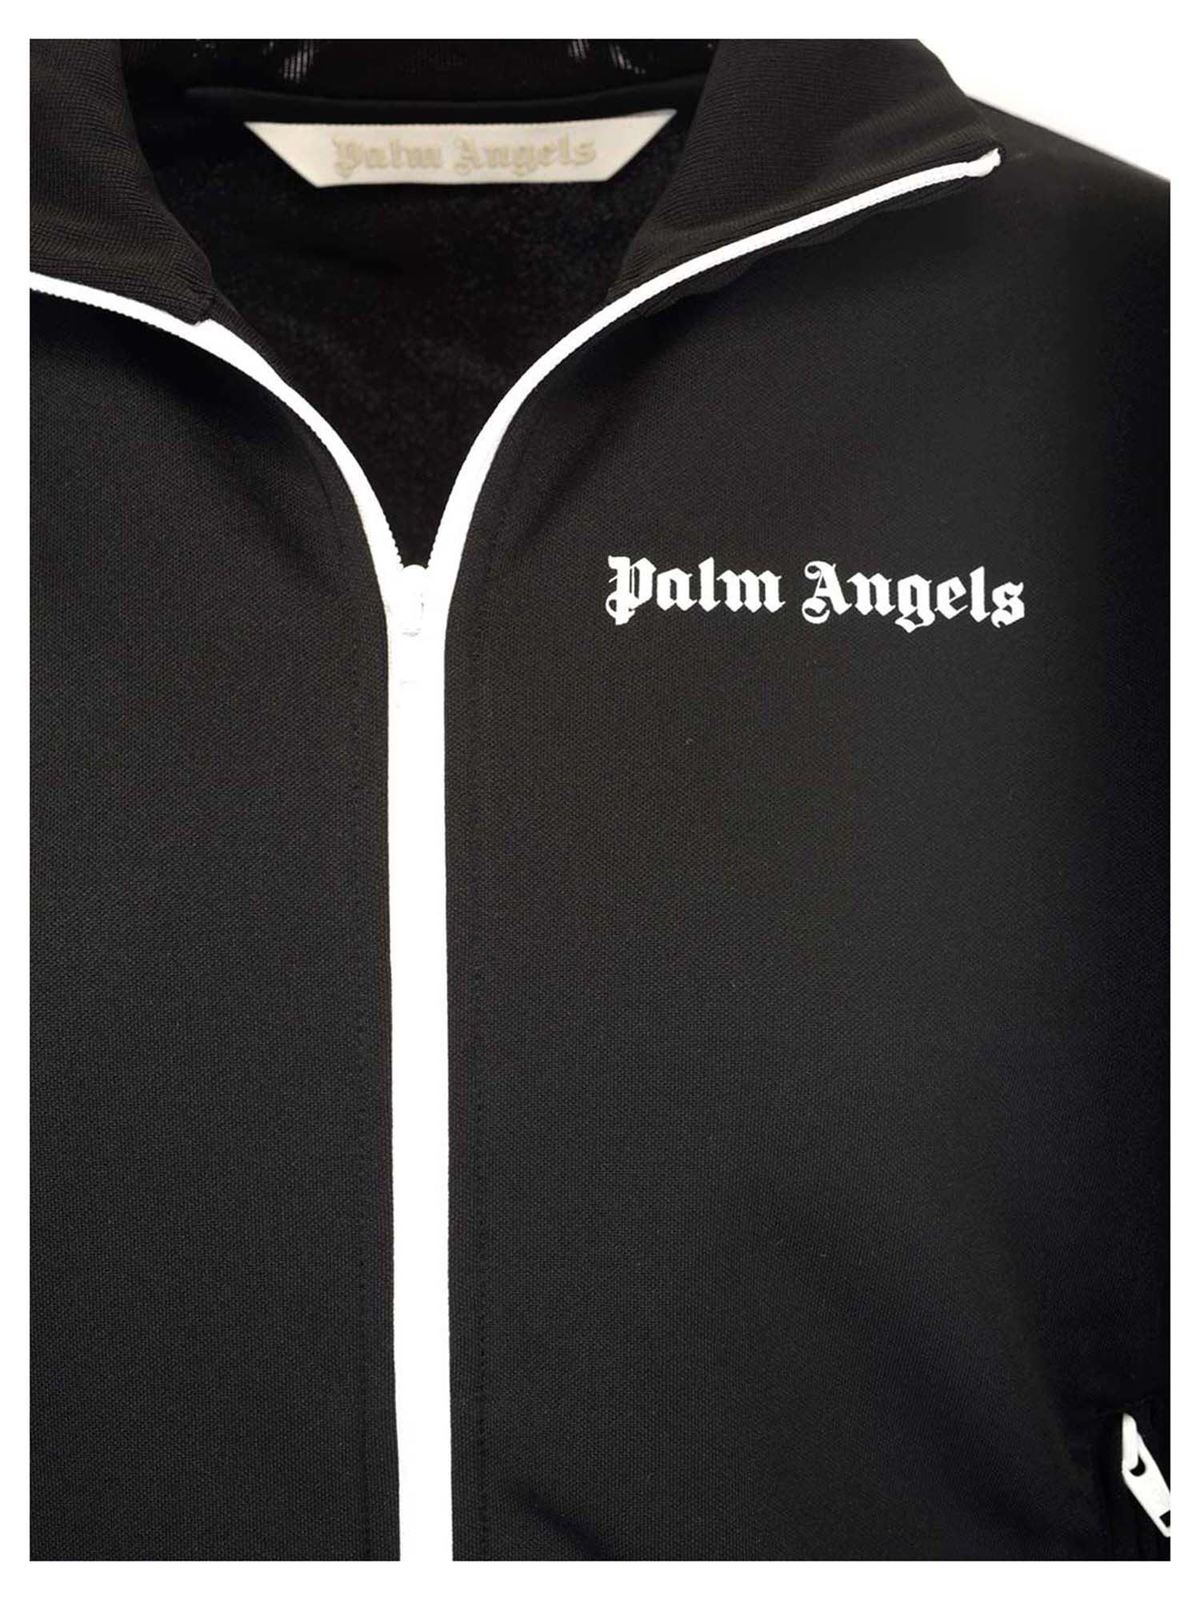 Palm Angels Band collar track jacket, Men's Clothing